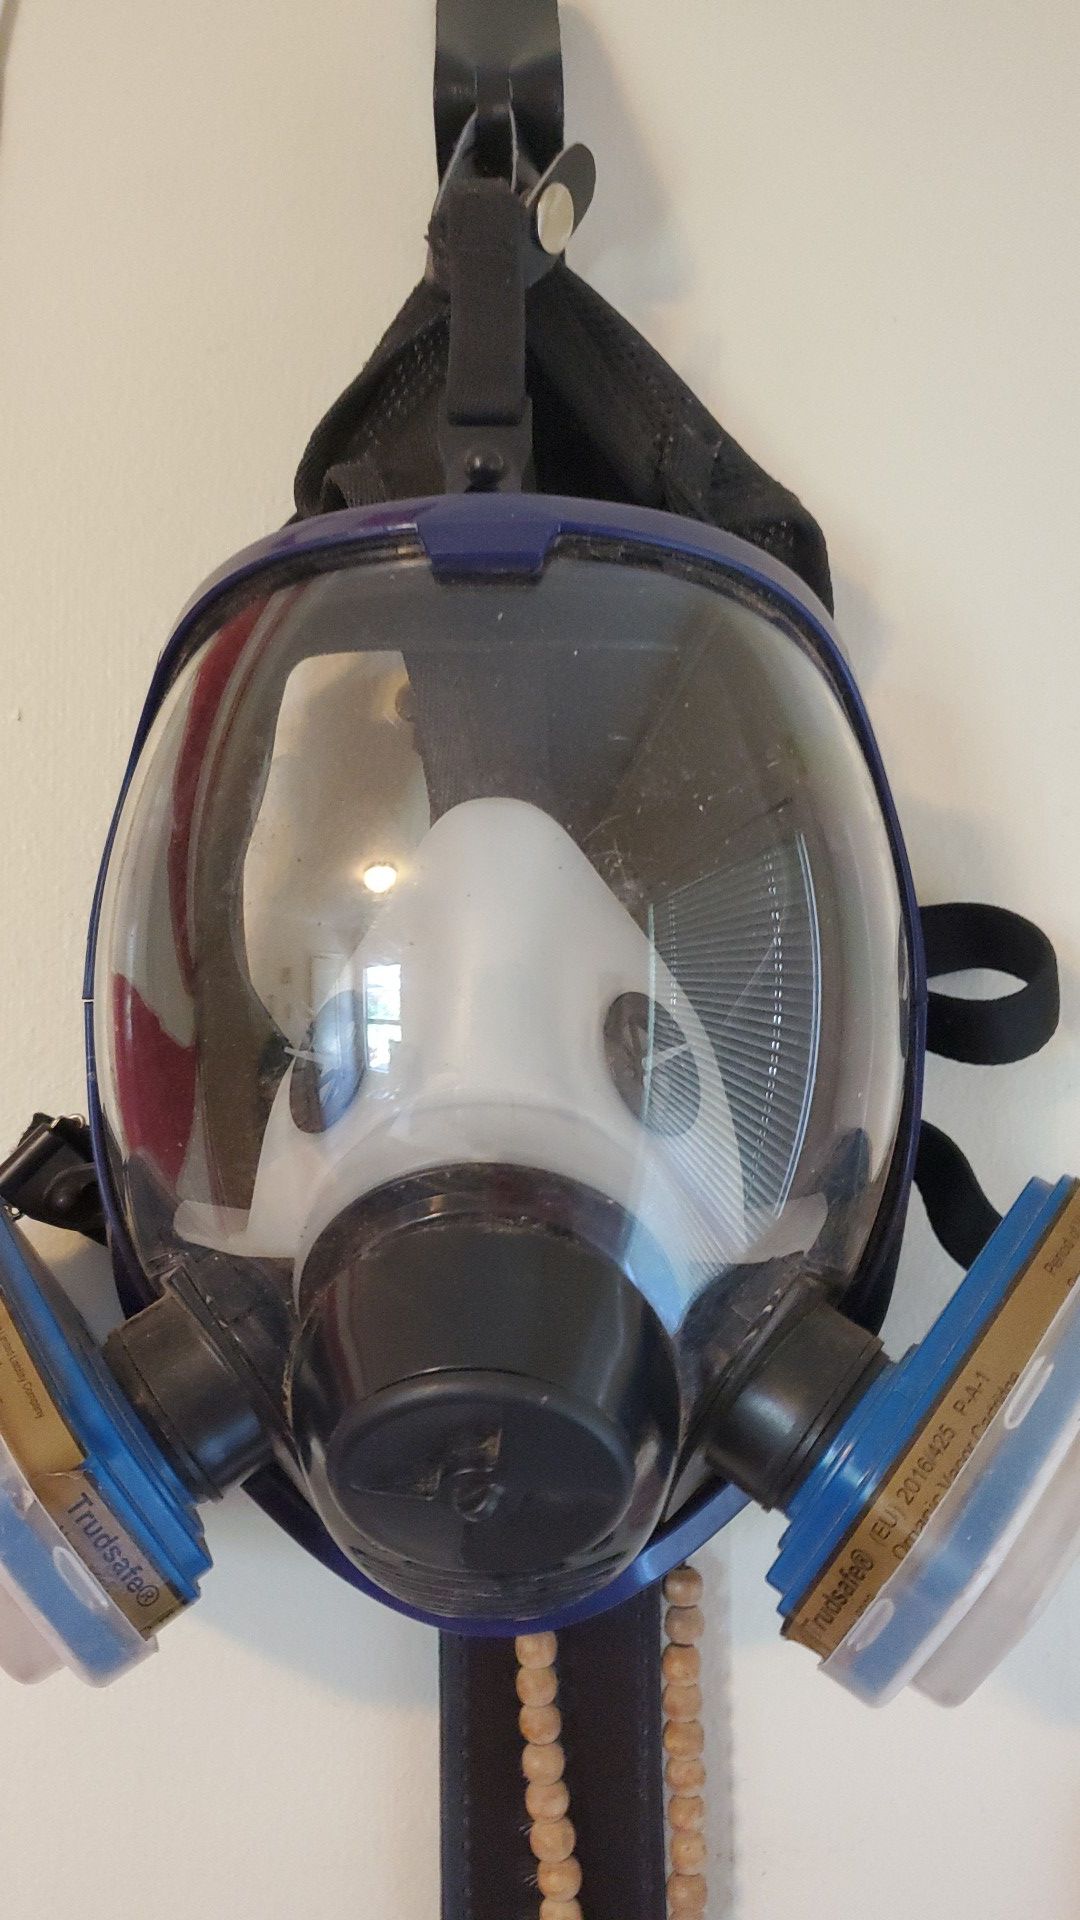 Chemical mask worn once